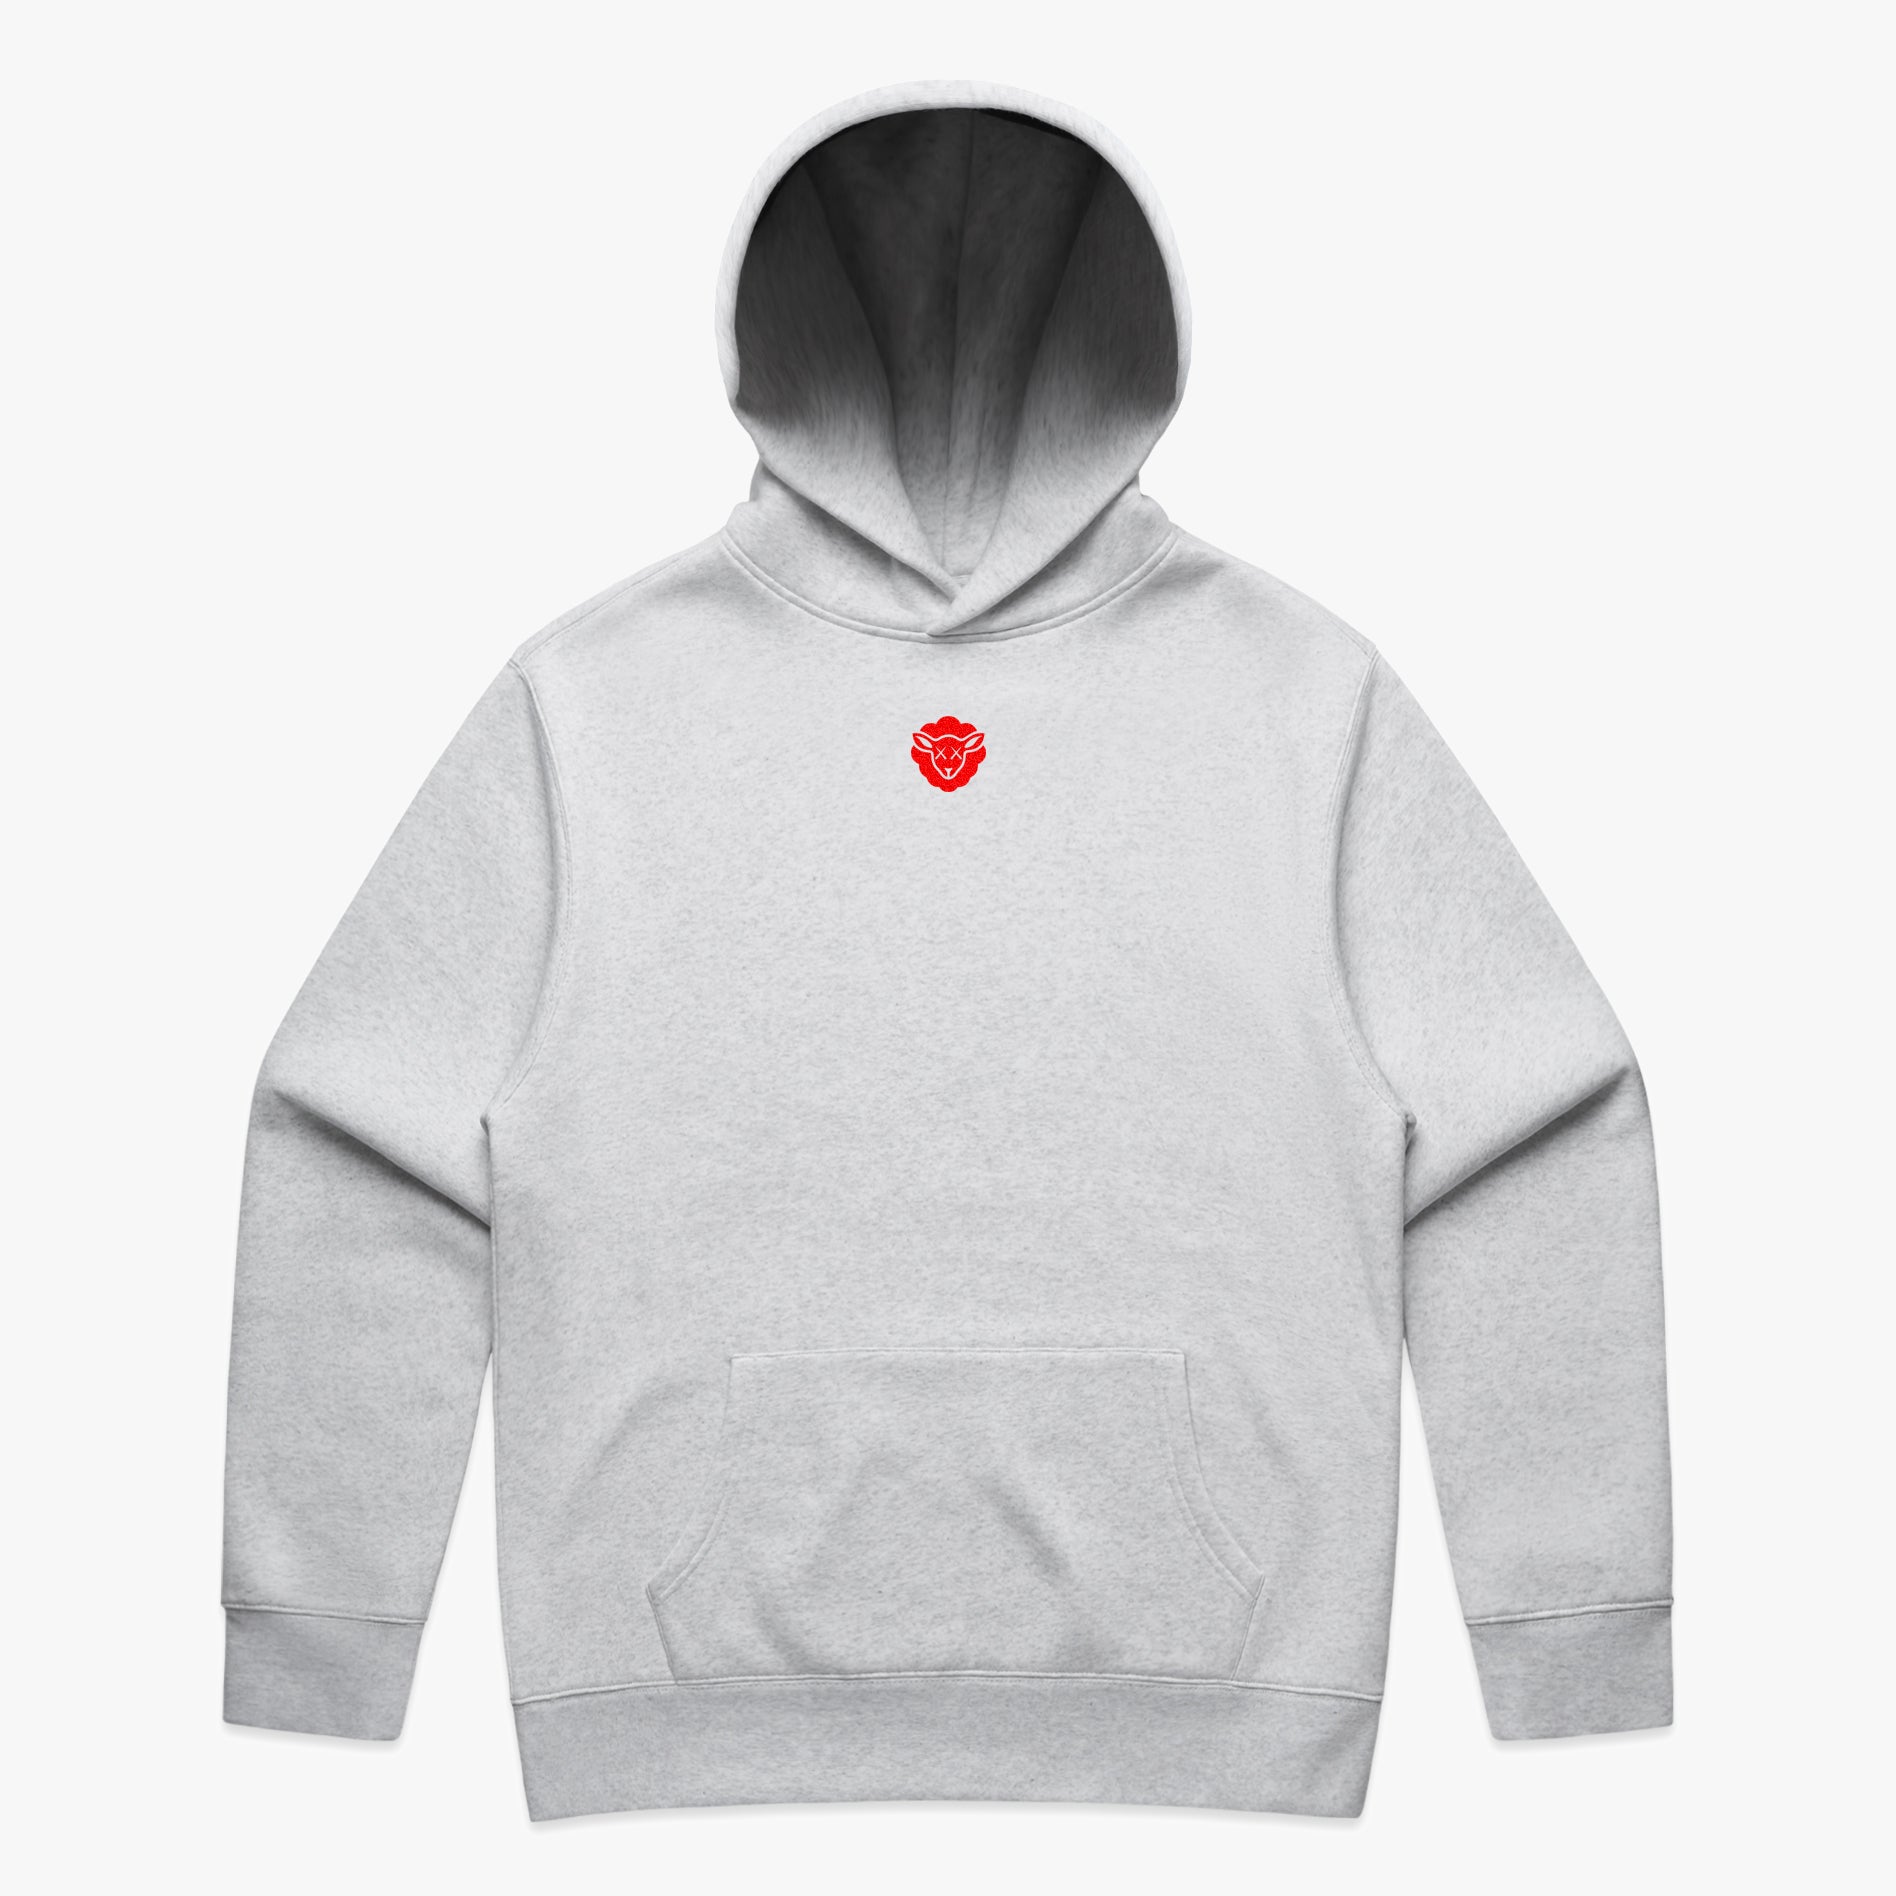 SHEEPEY Y2K Relax Hoodie White Heather